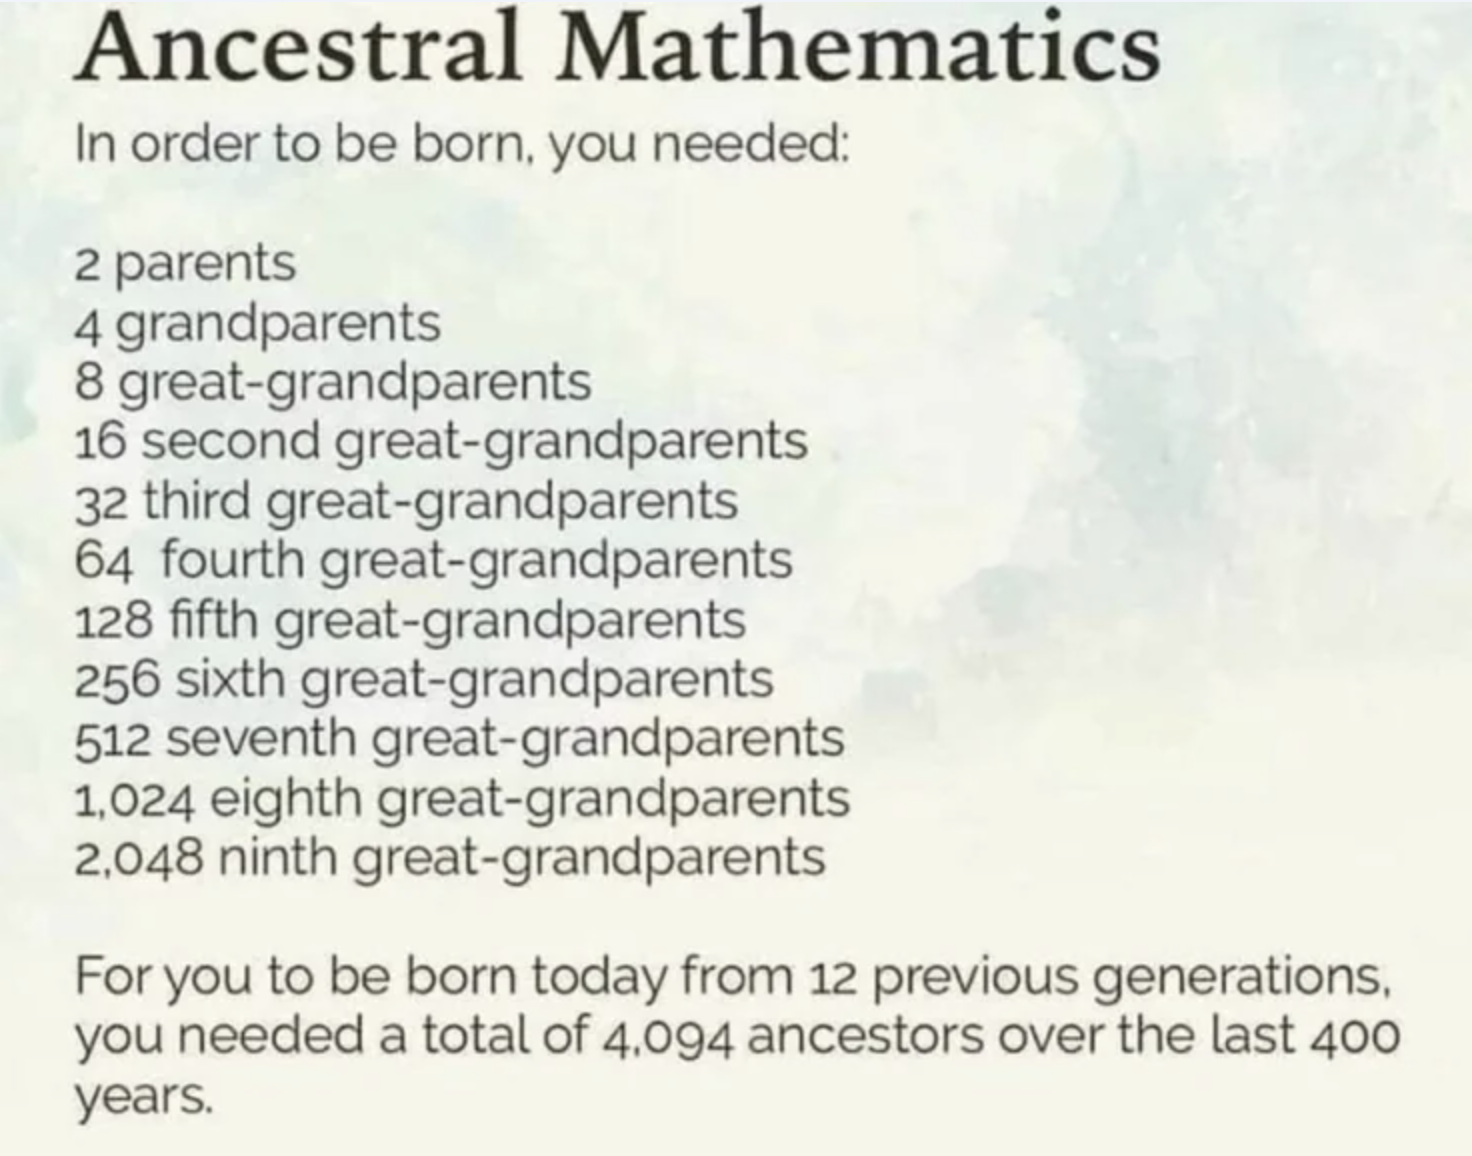 A list of what &quot;you needed&quot; in order to be born, going from 2 parents all the way to 2,048 ninth great-grandparents: &quot;for you to be born today from 12 previous generations, you needed a total of 4,094 ancestors over the last 400 years&quot;